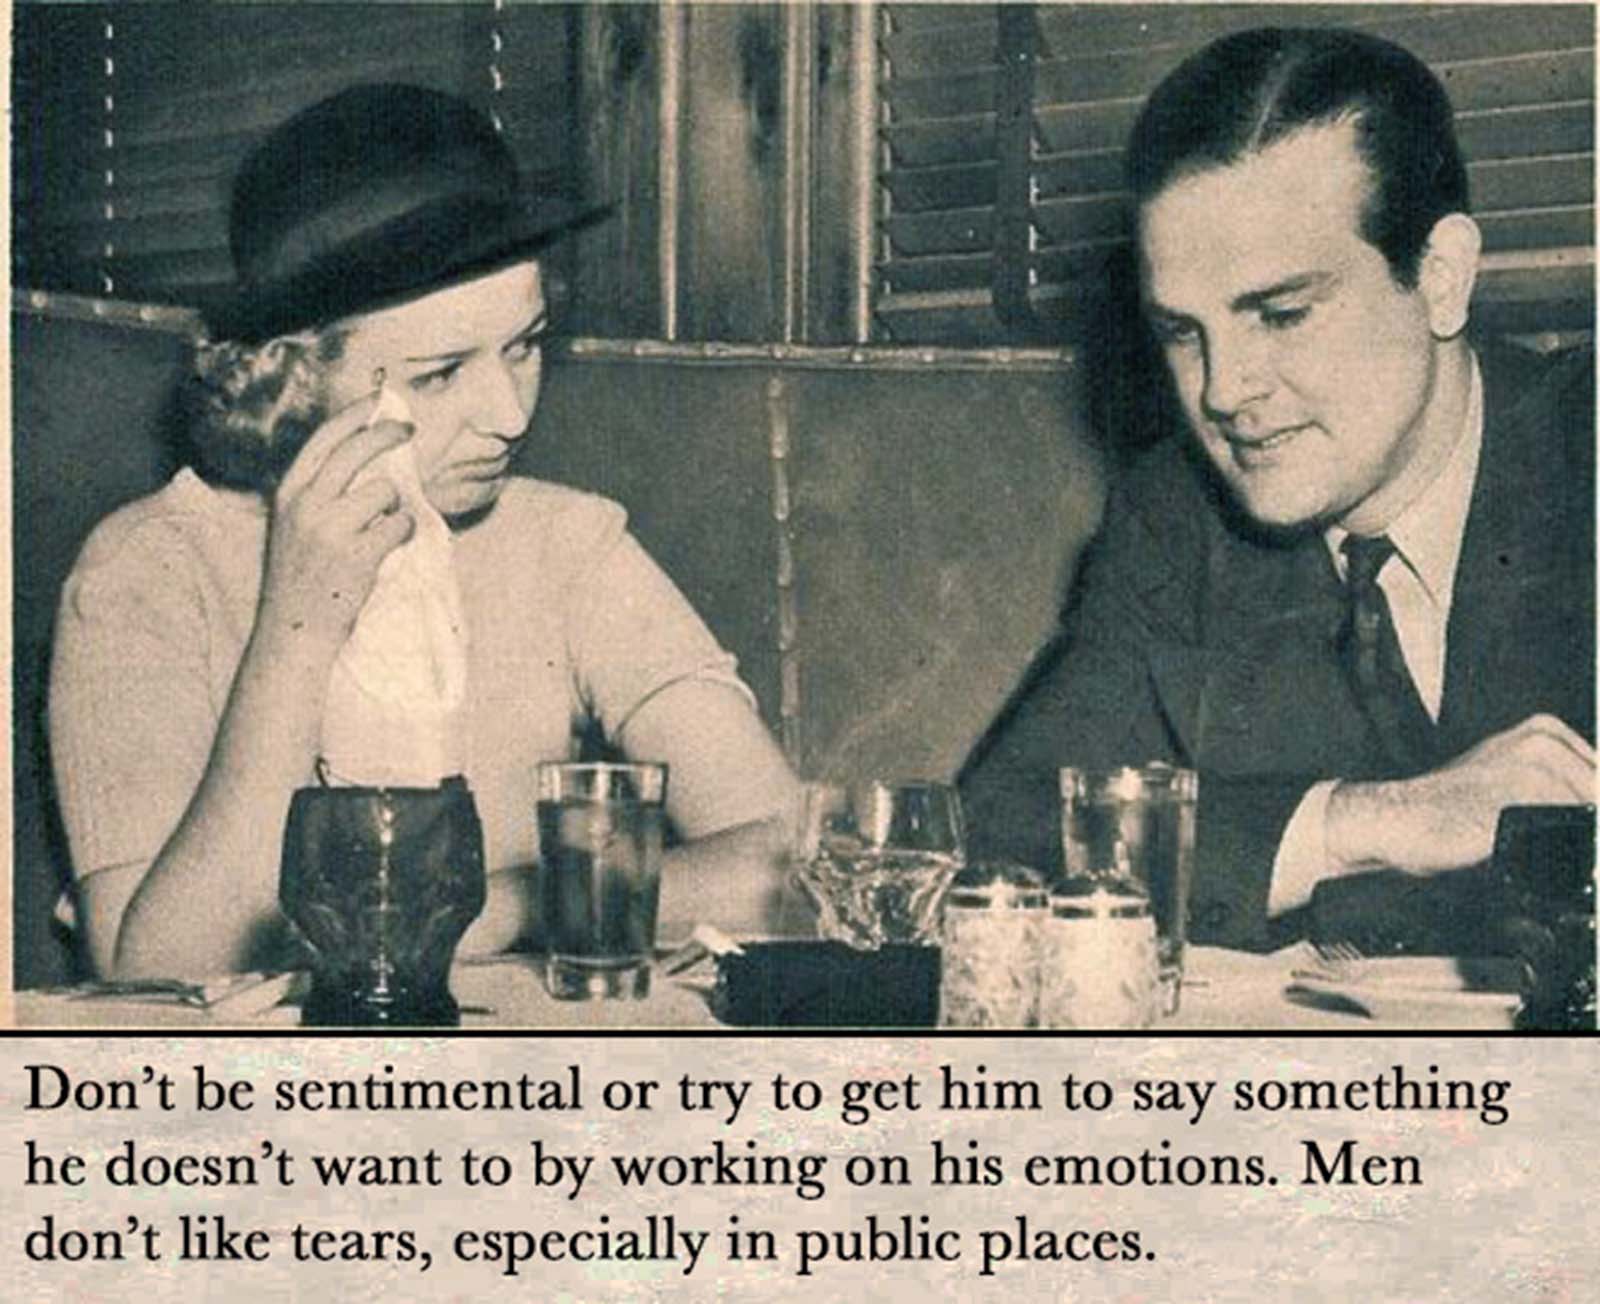 Don't be sentimental or try to get him to say something he doesn't want to by working on his emotions.